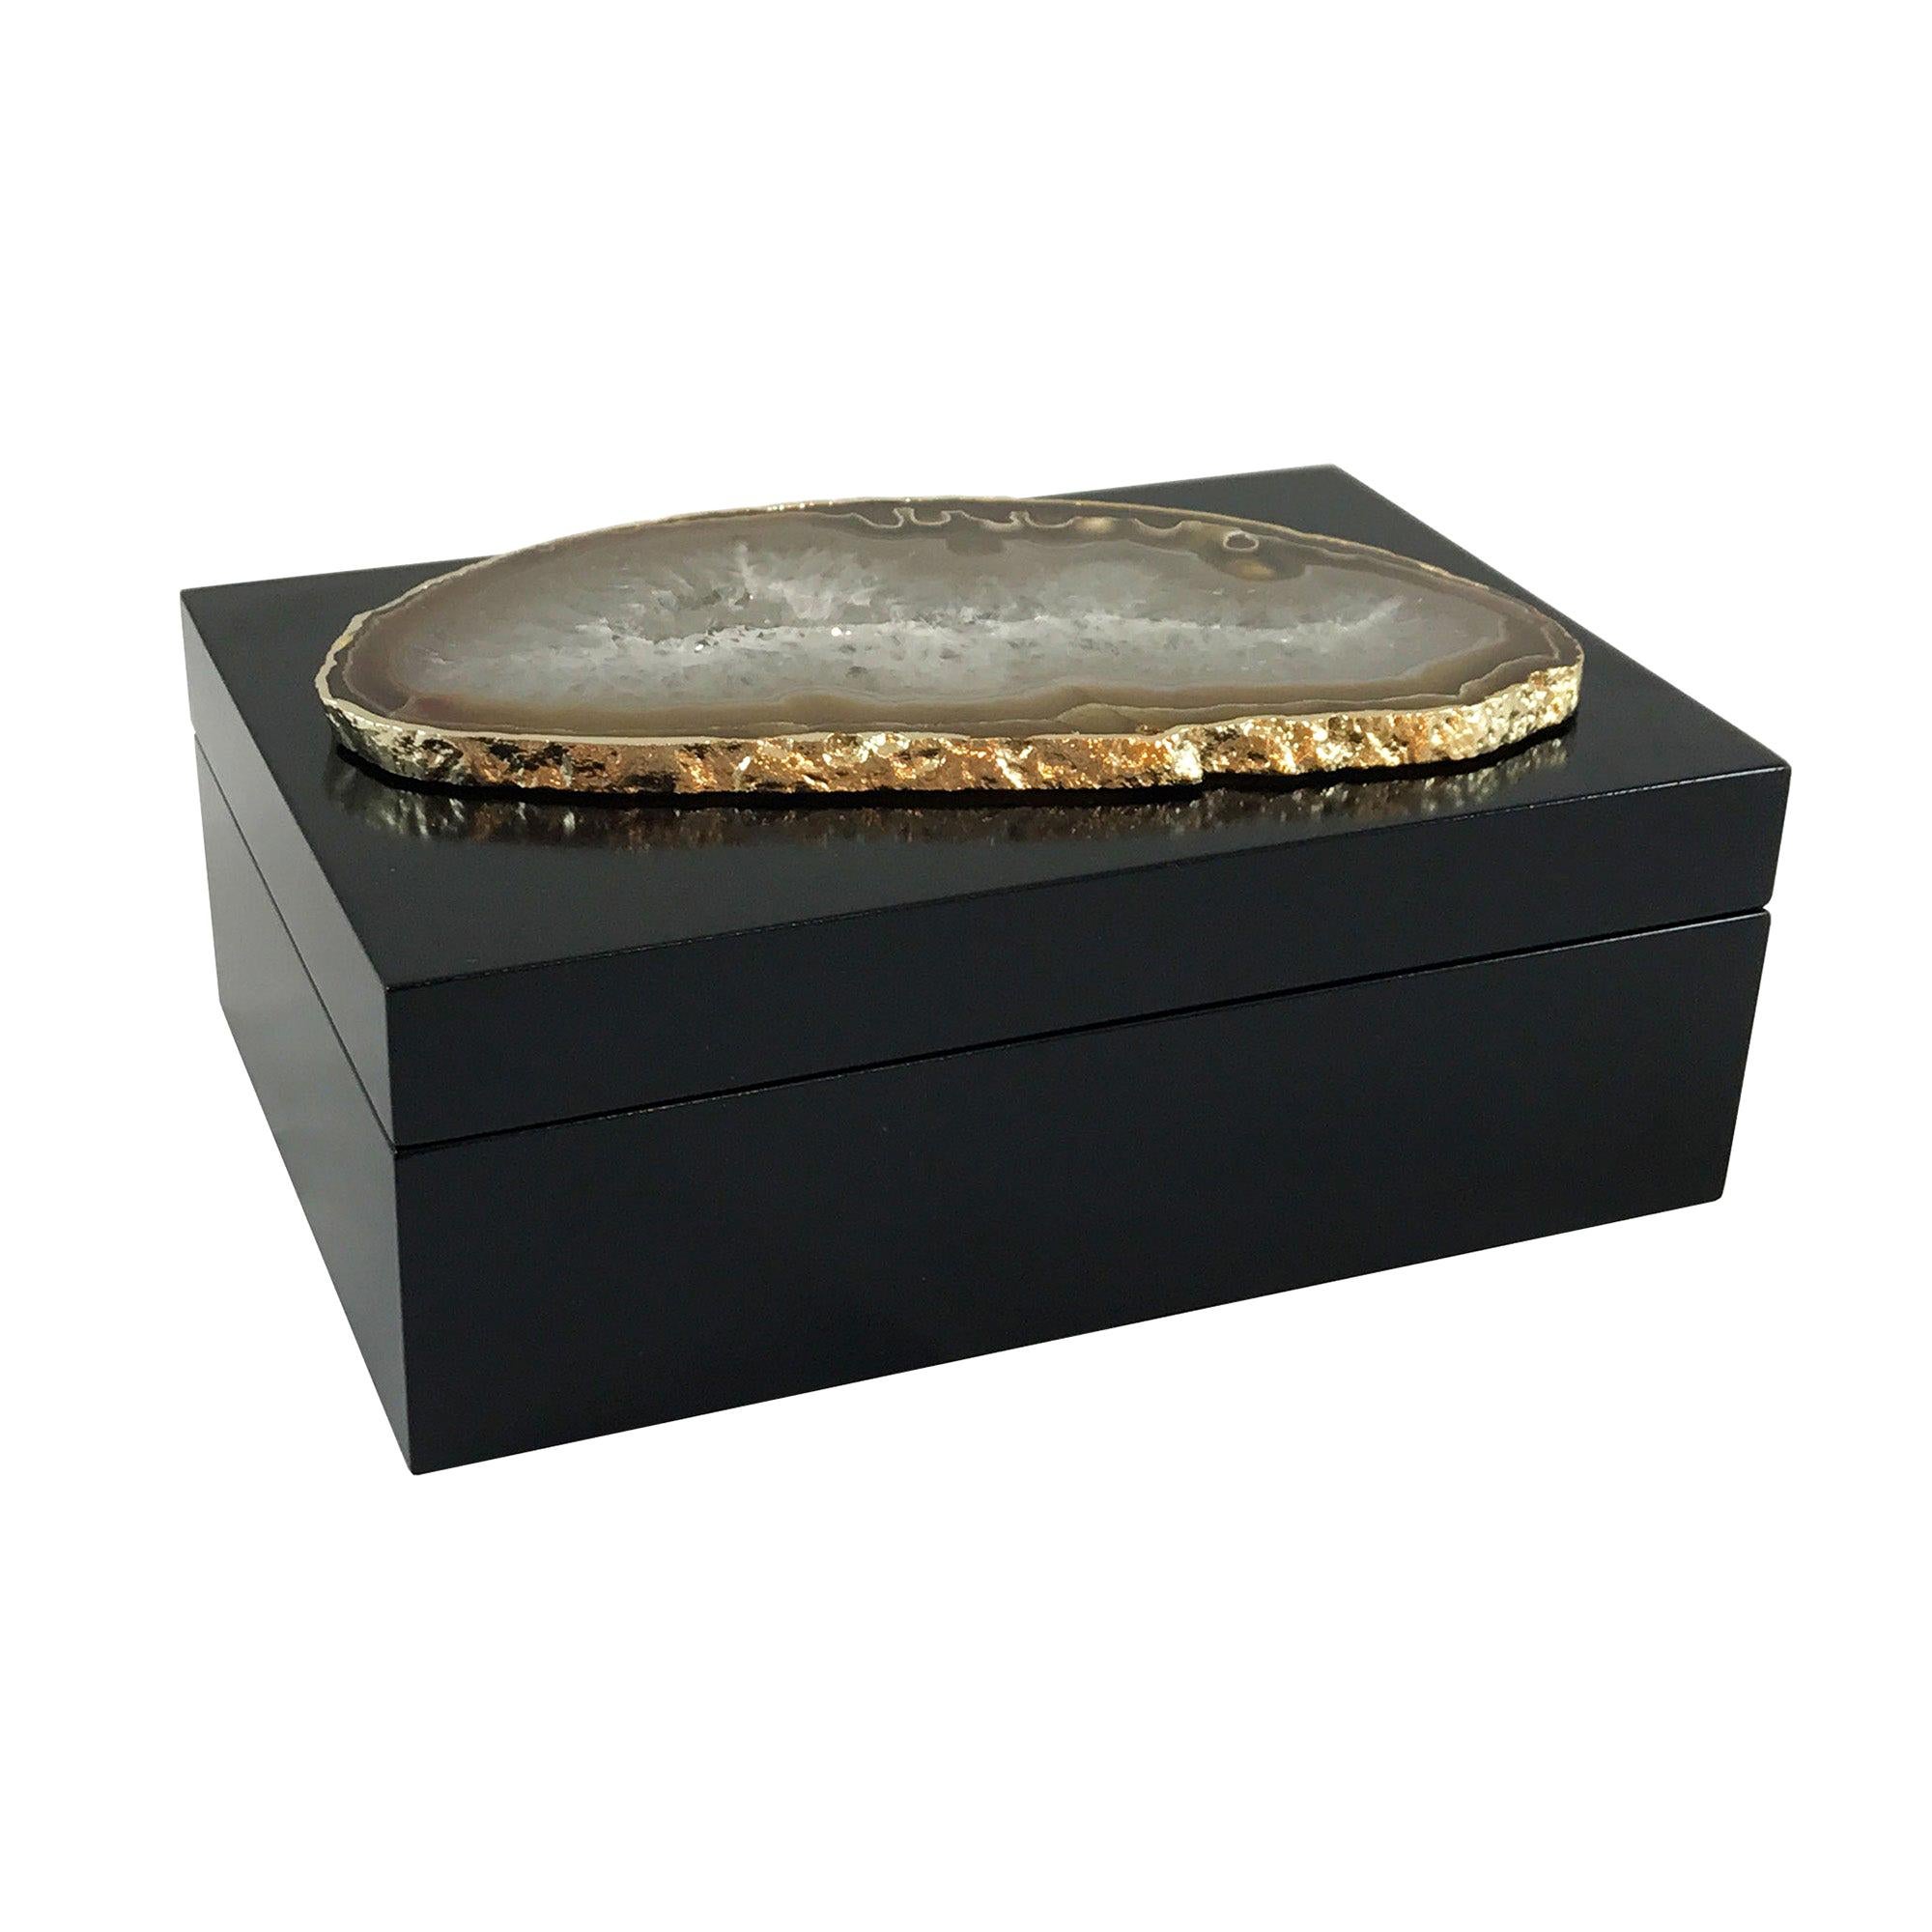 Guilherme Large Agate Box in Black and Natural Stone by CuratedKravet